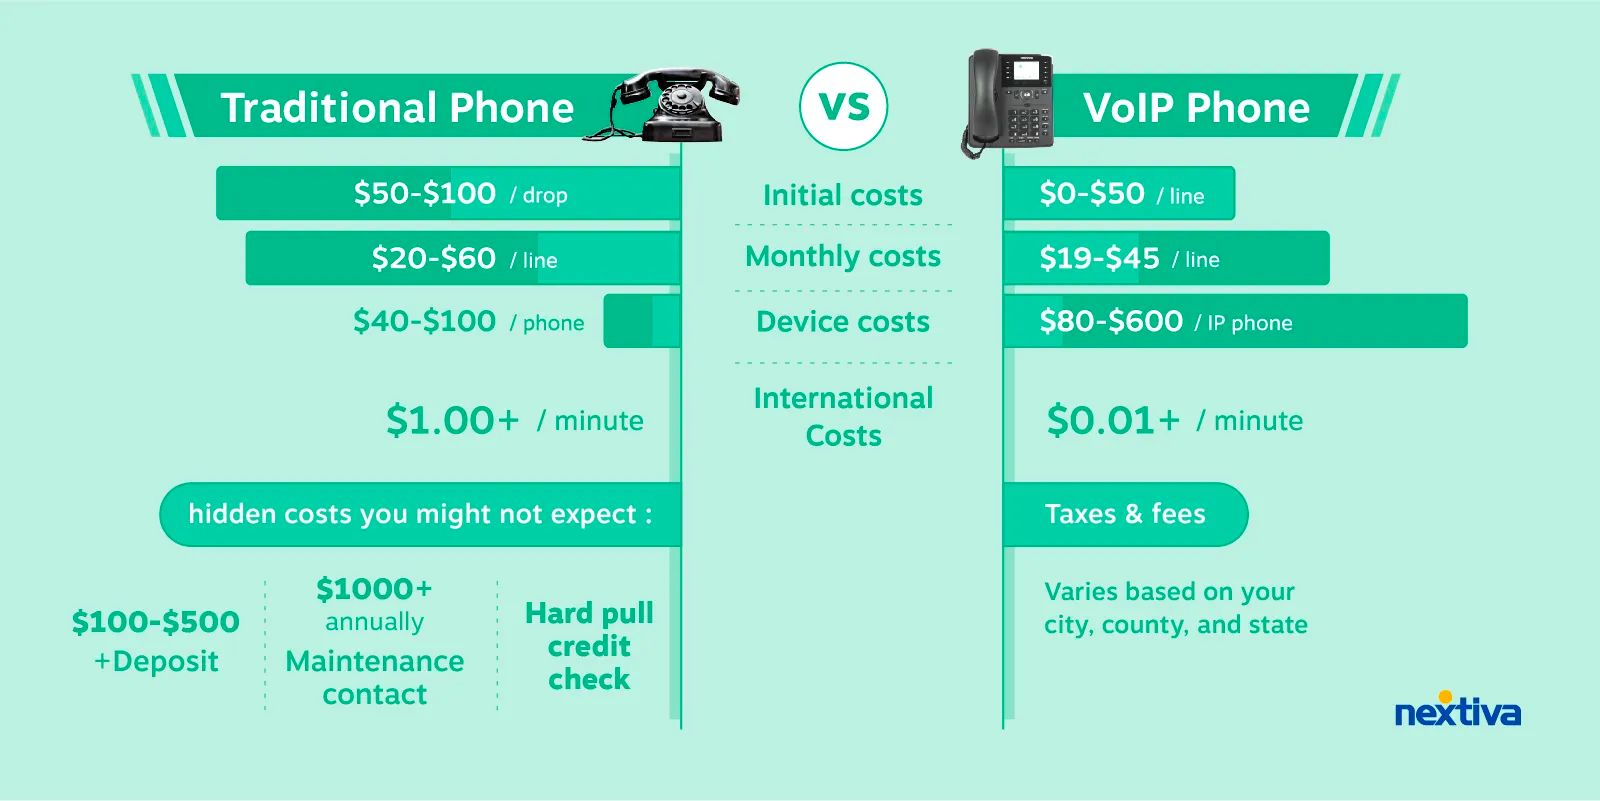 Traditional phone vs VoIP phone